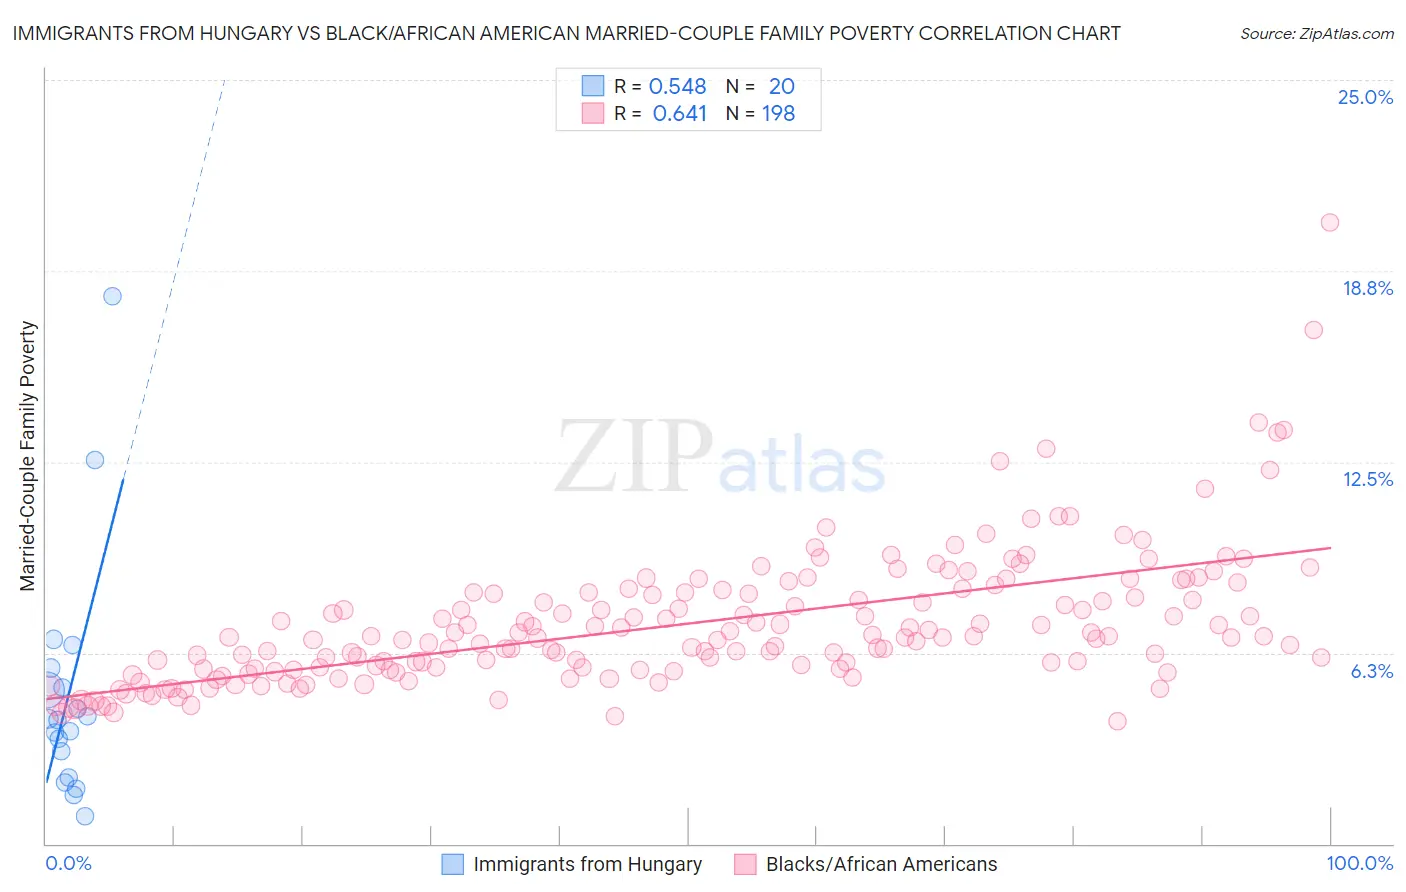 Immigrants from Hungary vs Black/African American Married-Couple Family Poverty